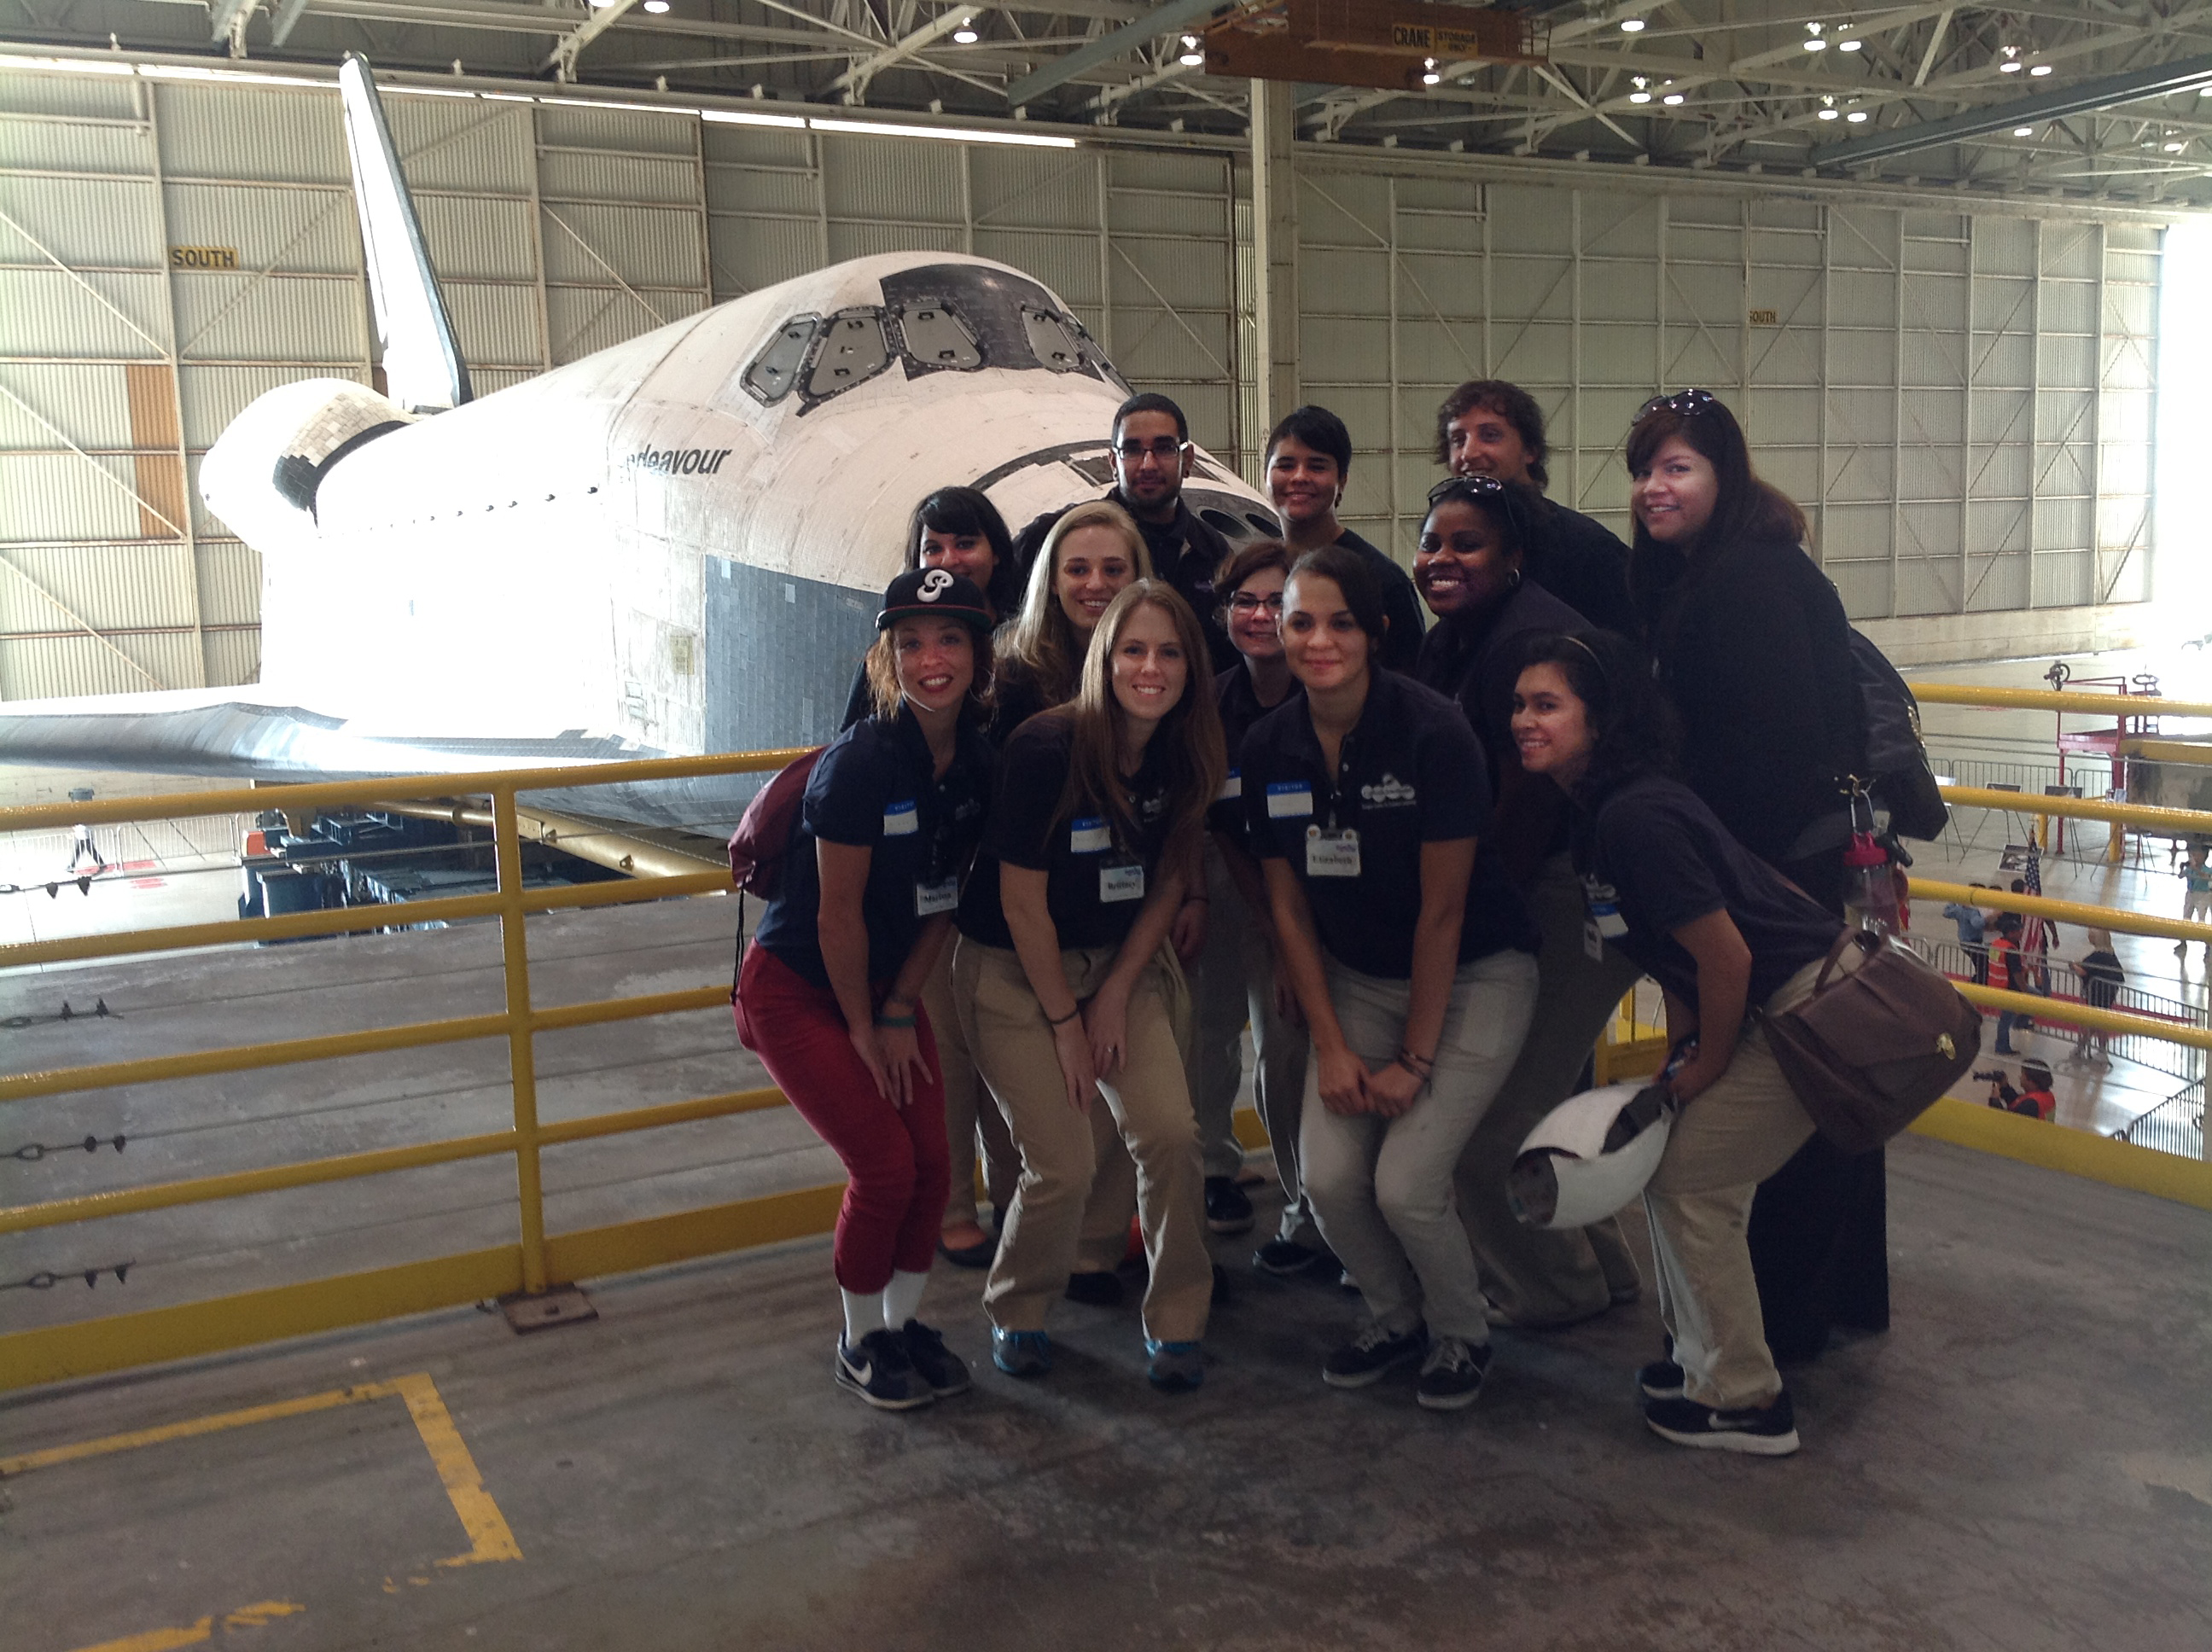 Visitors to the Endeavour at the United hangar